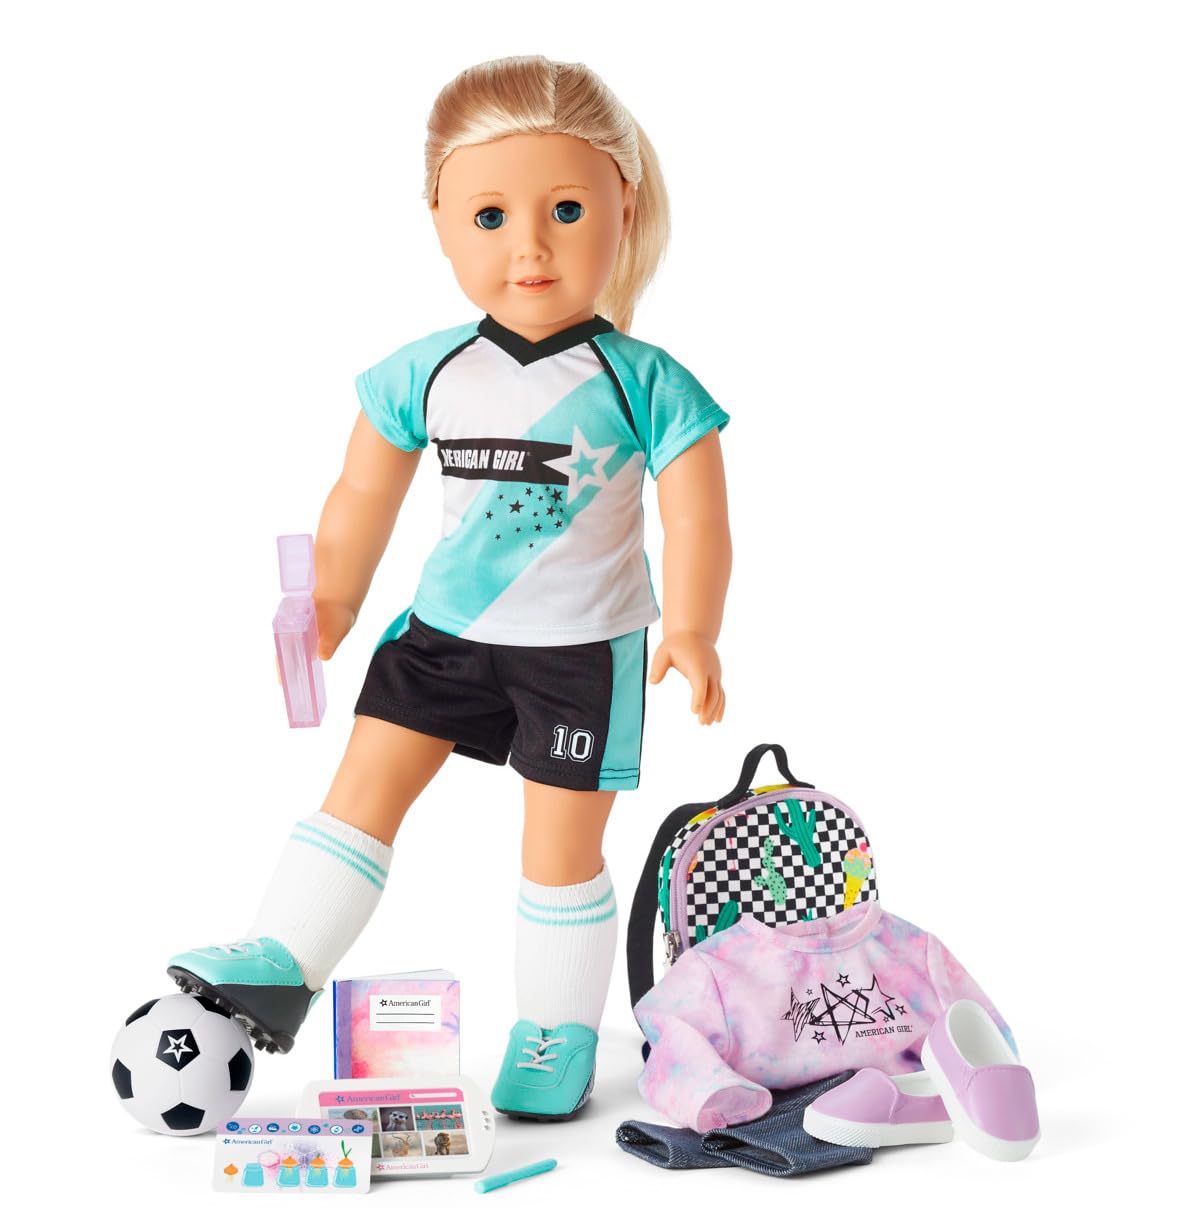 American Girl Truly Me 18-inch Doll 27 and School Day to Soccer Play Set with Blue Eyes, Layered Blonde Hair, Light-to-Medium Skin, Warm Undertones, tie-dye Sweatshirt, Supplies, Game Gear Ages 6+